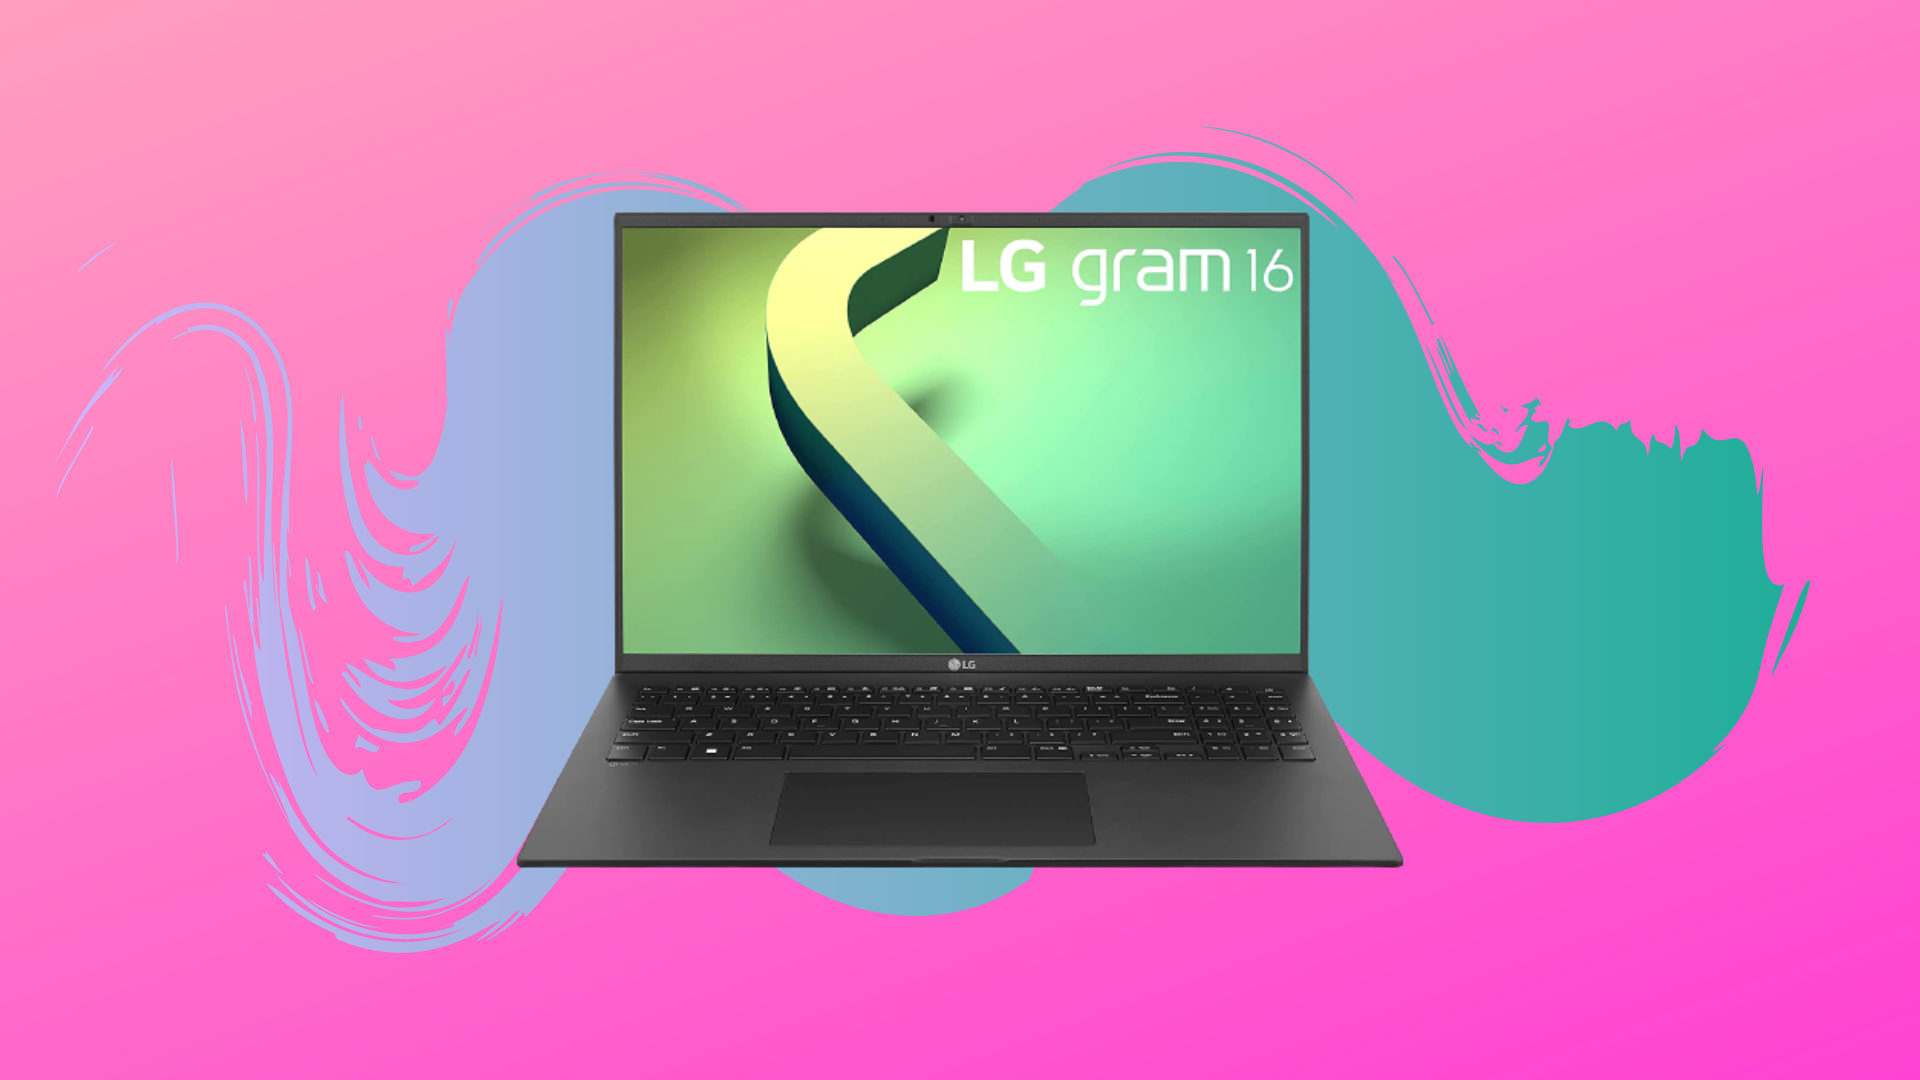 This ultra-lightweight but powerful LG gram laptop is at its best price ever of $976